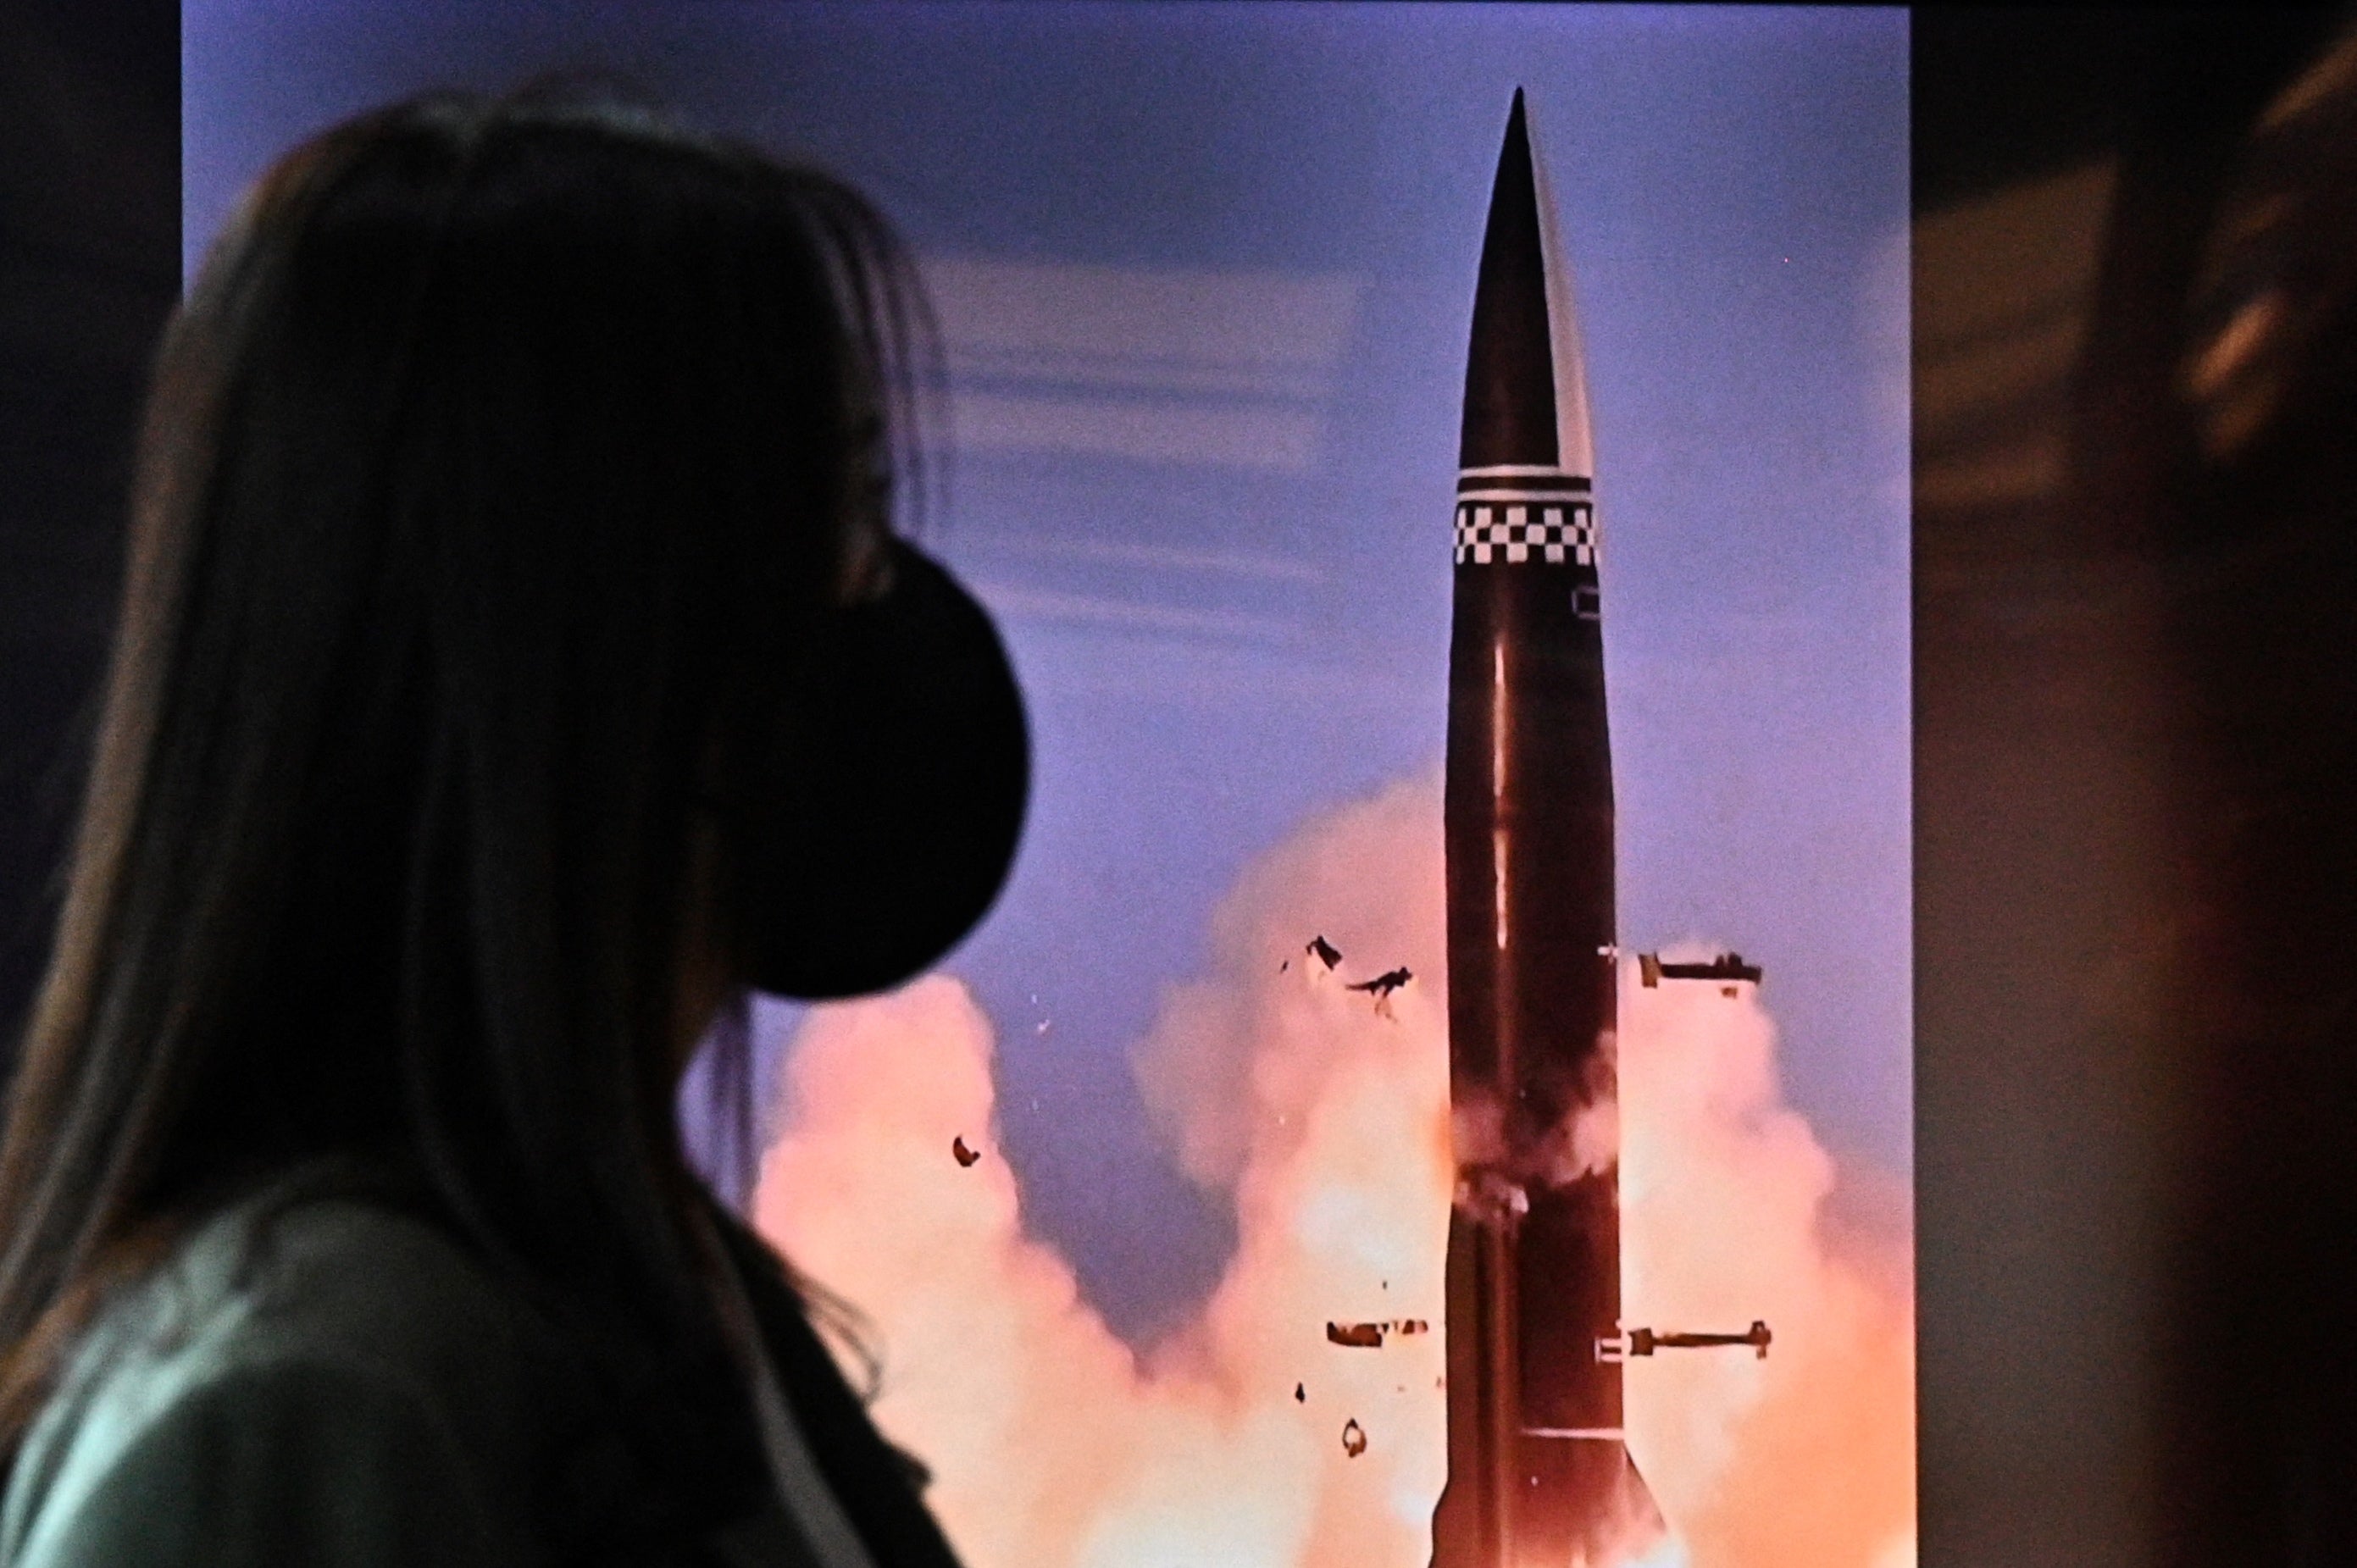 A woman in South Korea walks past a news broadcast of a North Korean missile test on 19 October, 2021.